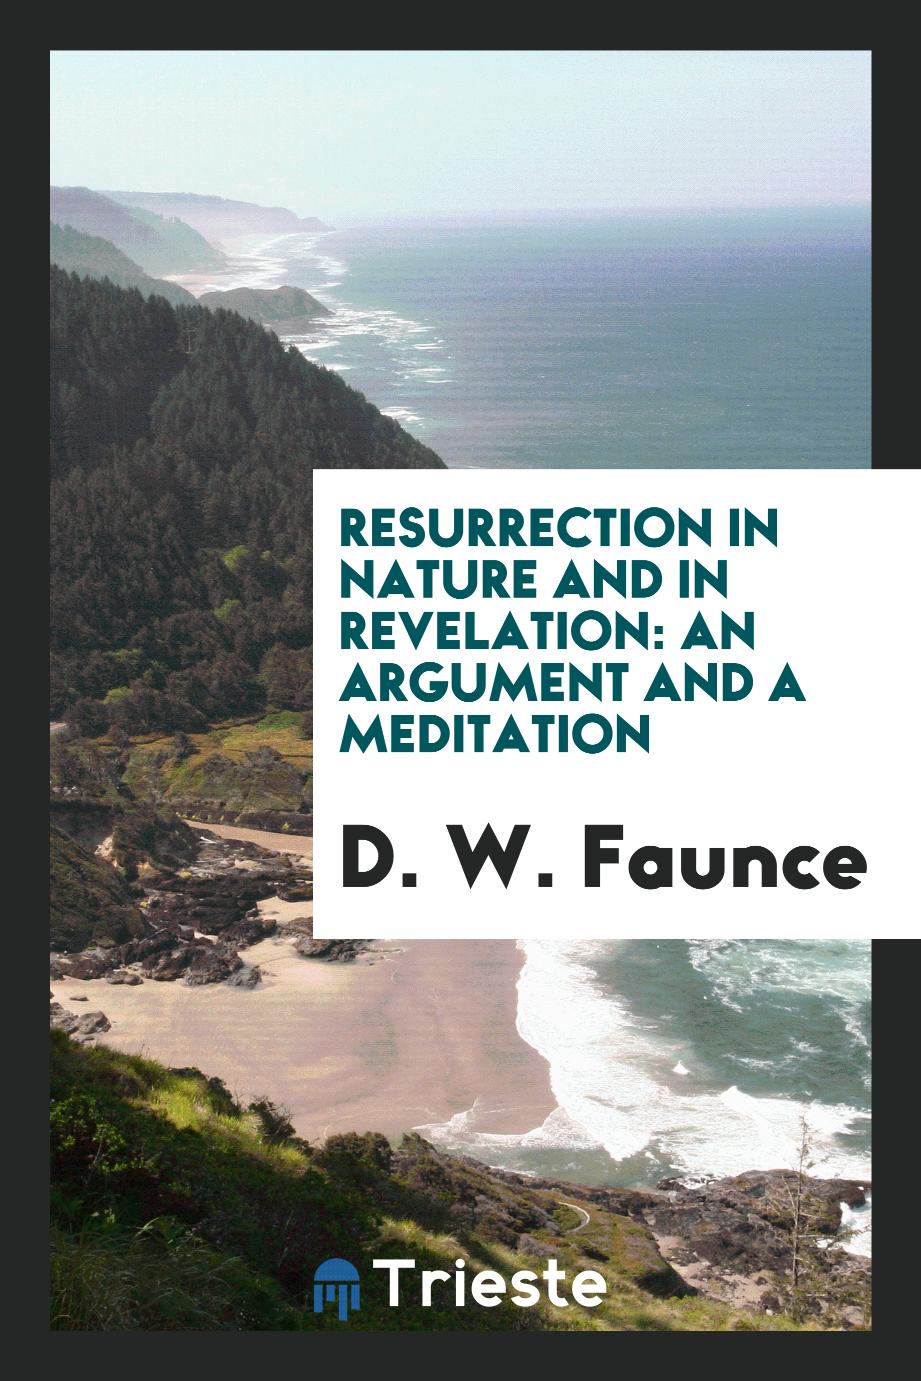 Resurrection in Nature and in Revelation: An Argument and a Meditation